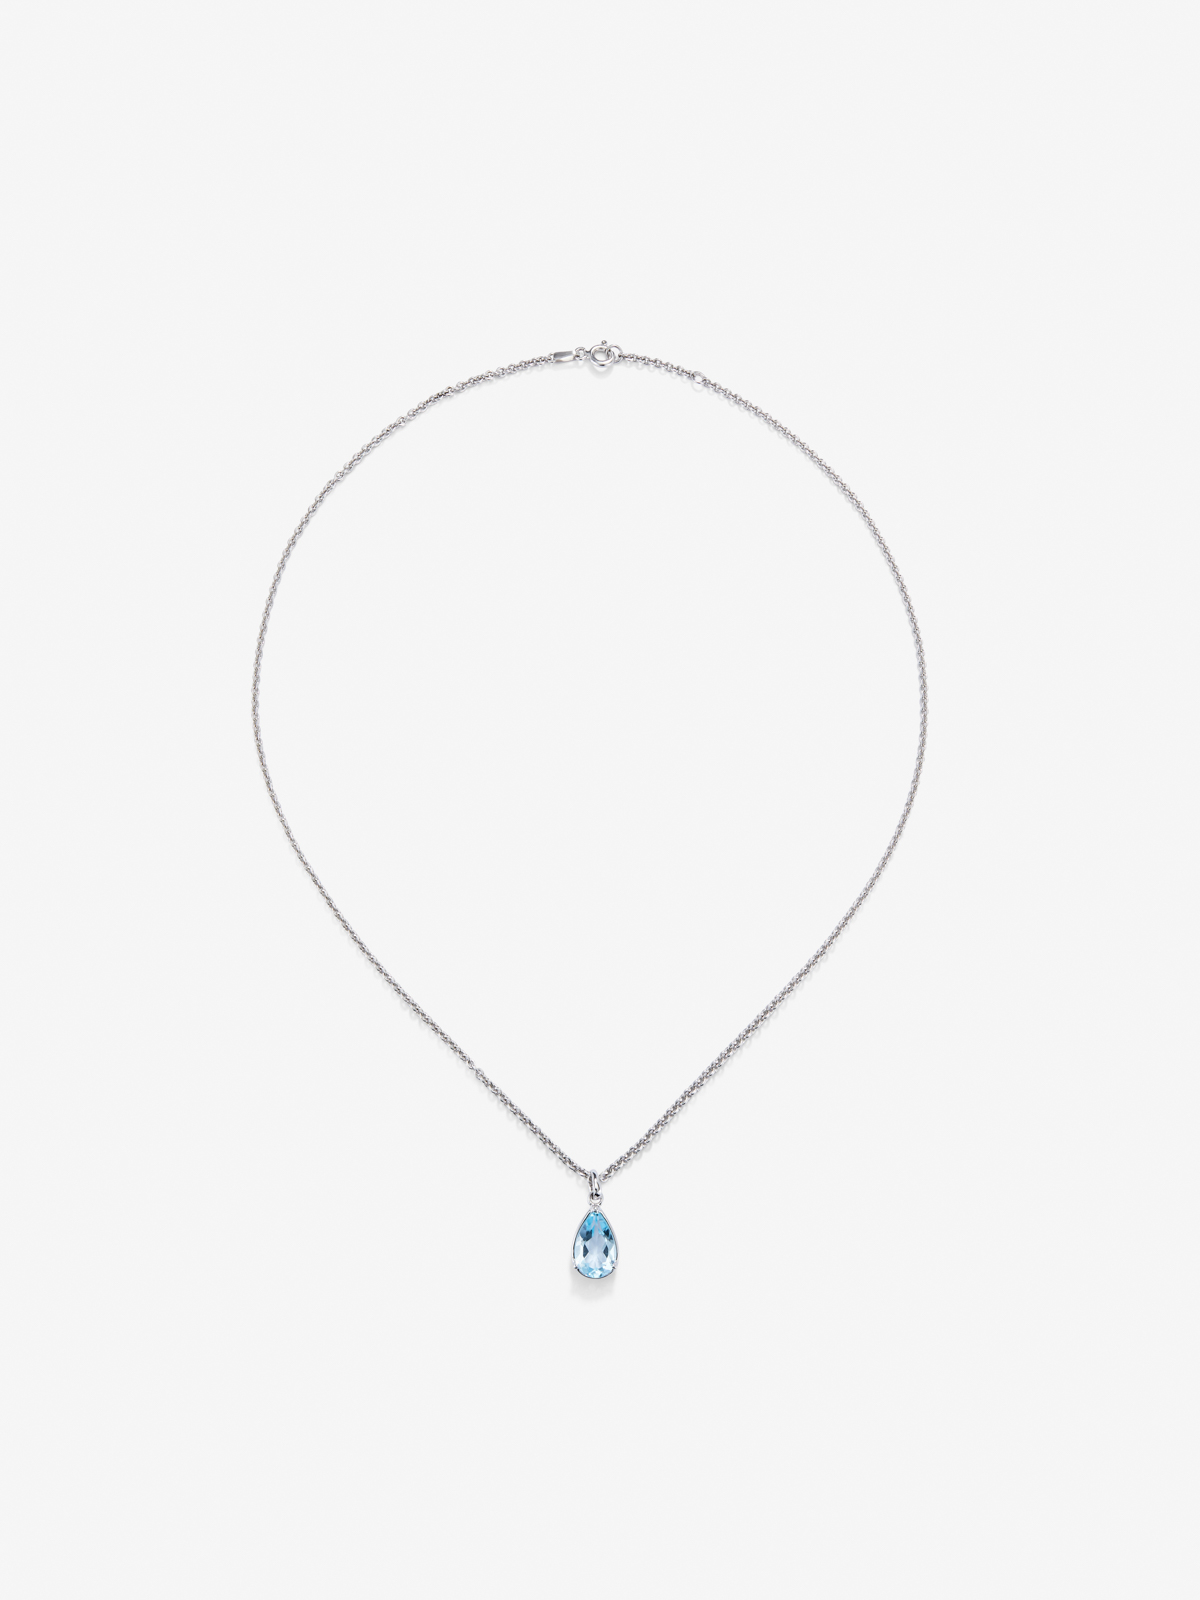 925 Silver chain pendant with topaz